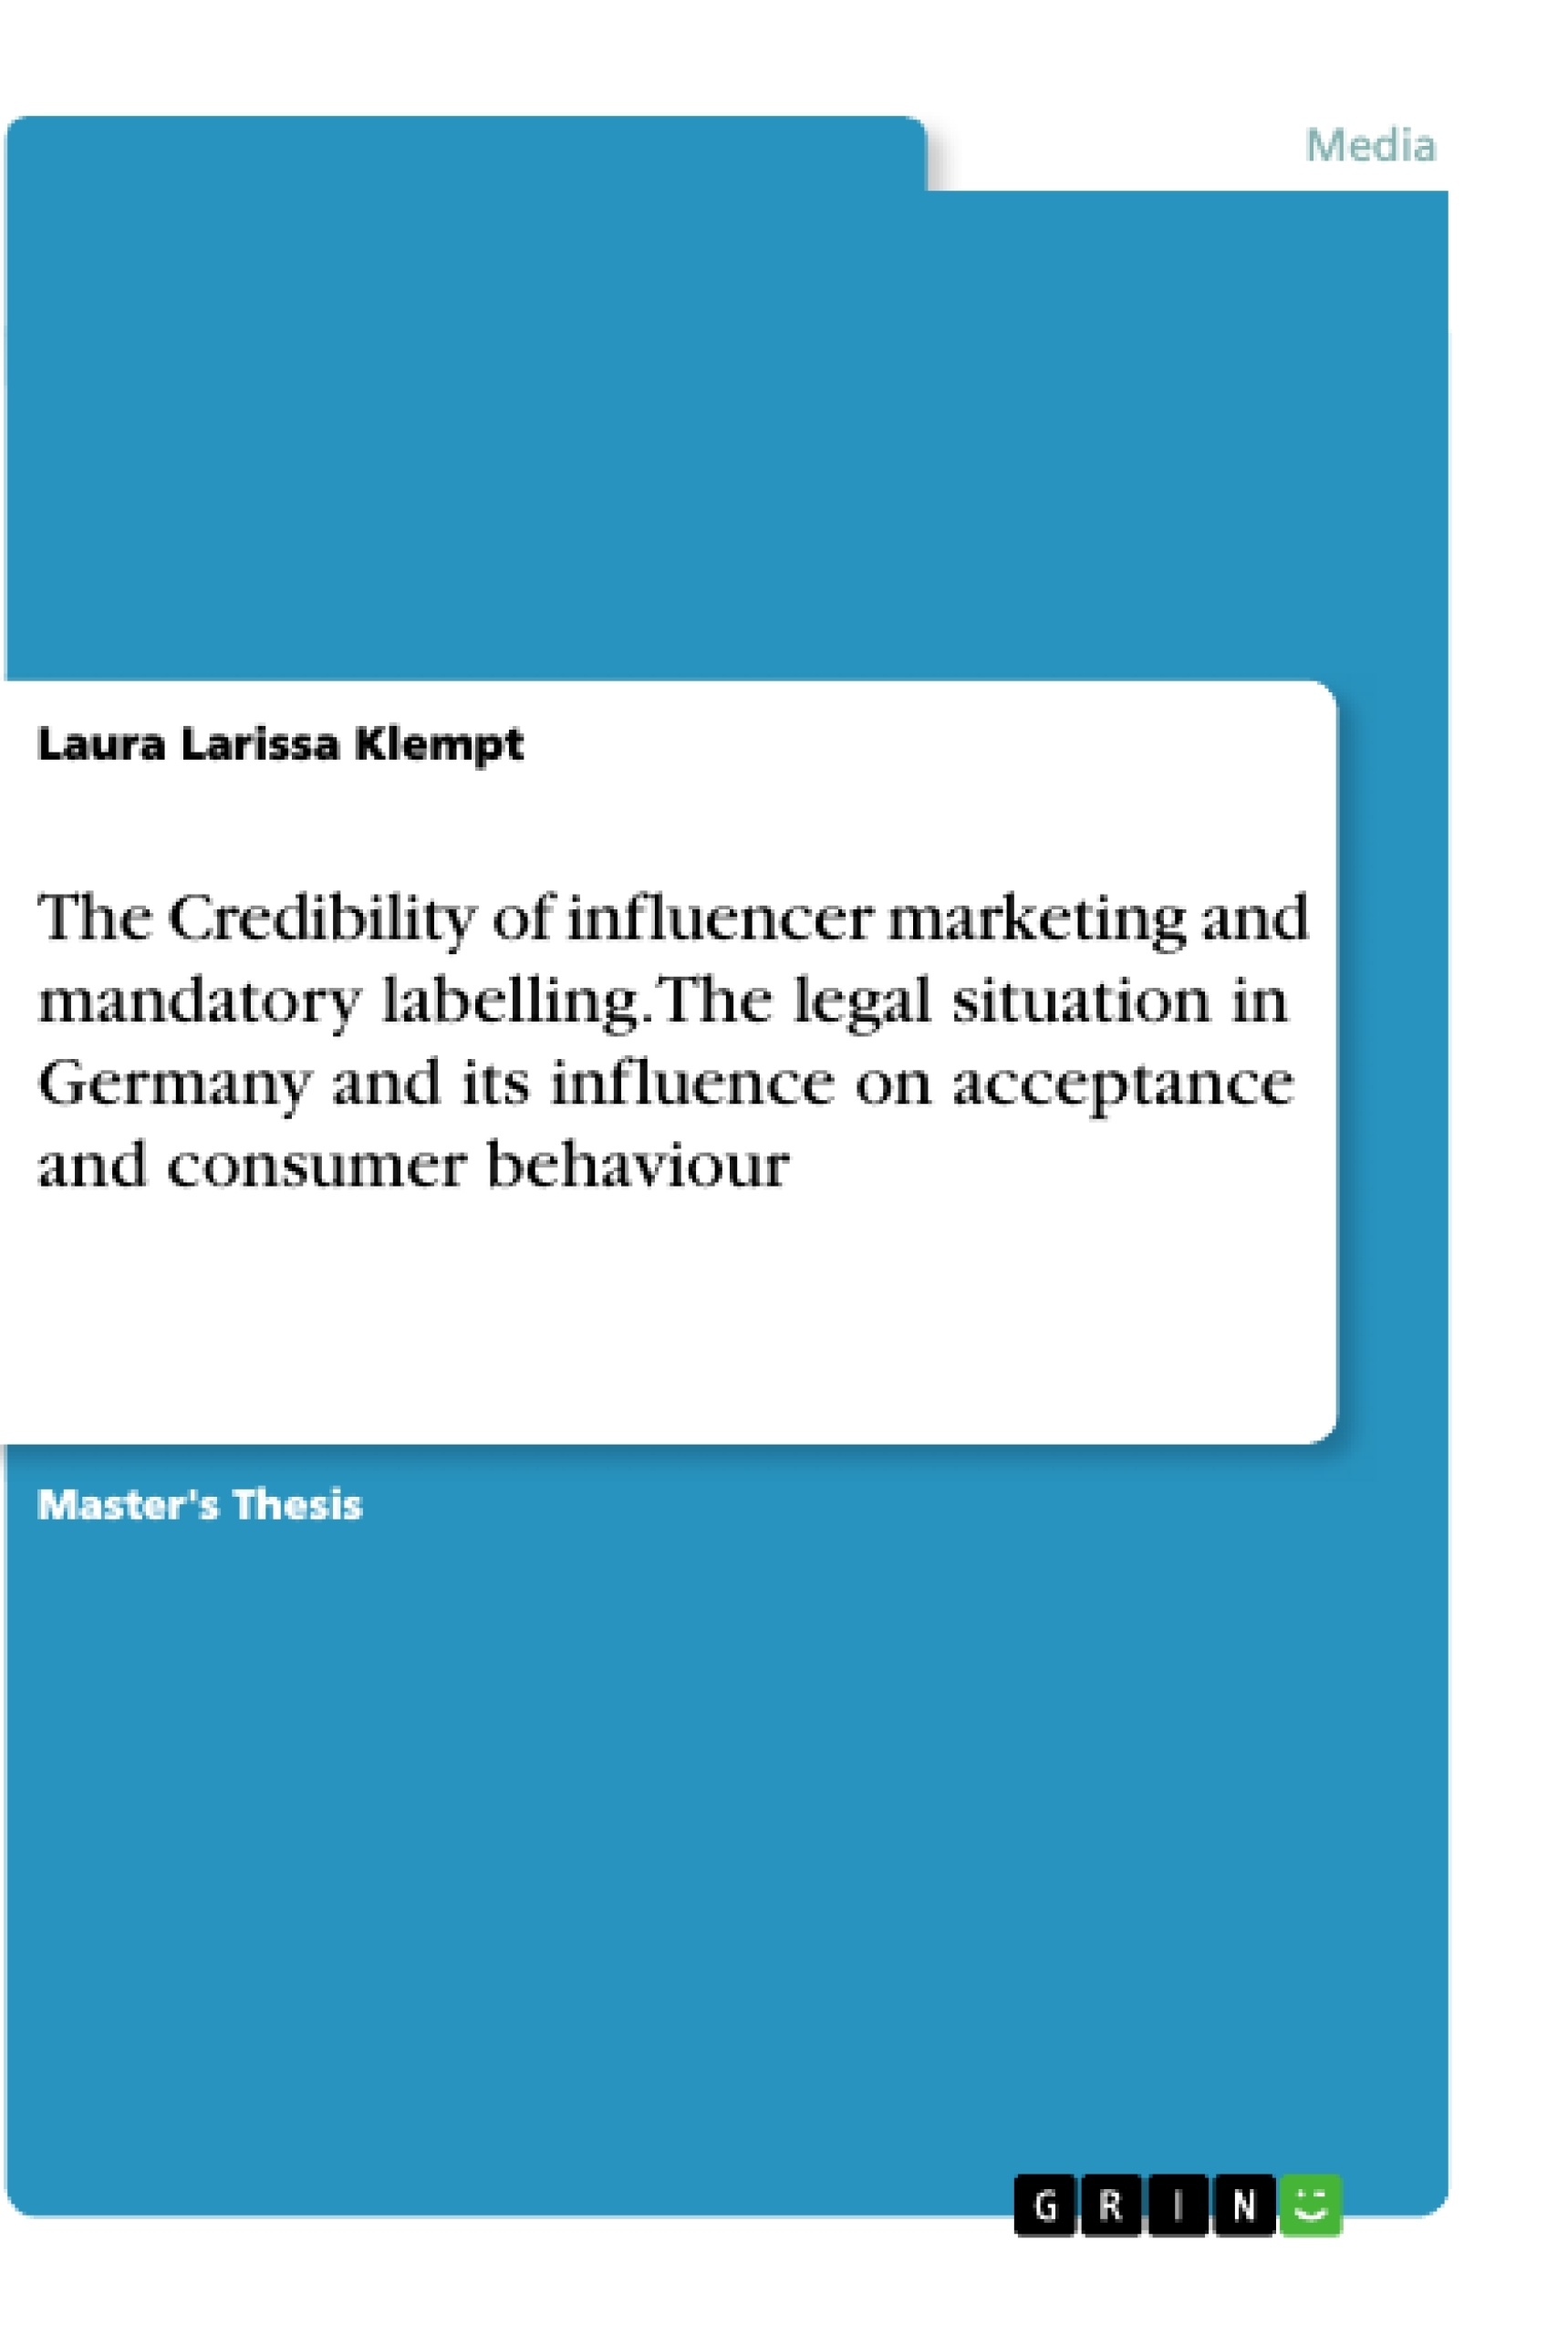 Titel: The Credibility of influencer marketing and mandatory labelling.The legal situation in Germany and its influence on acceptance and consumer behaviour